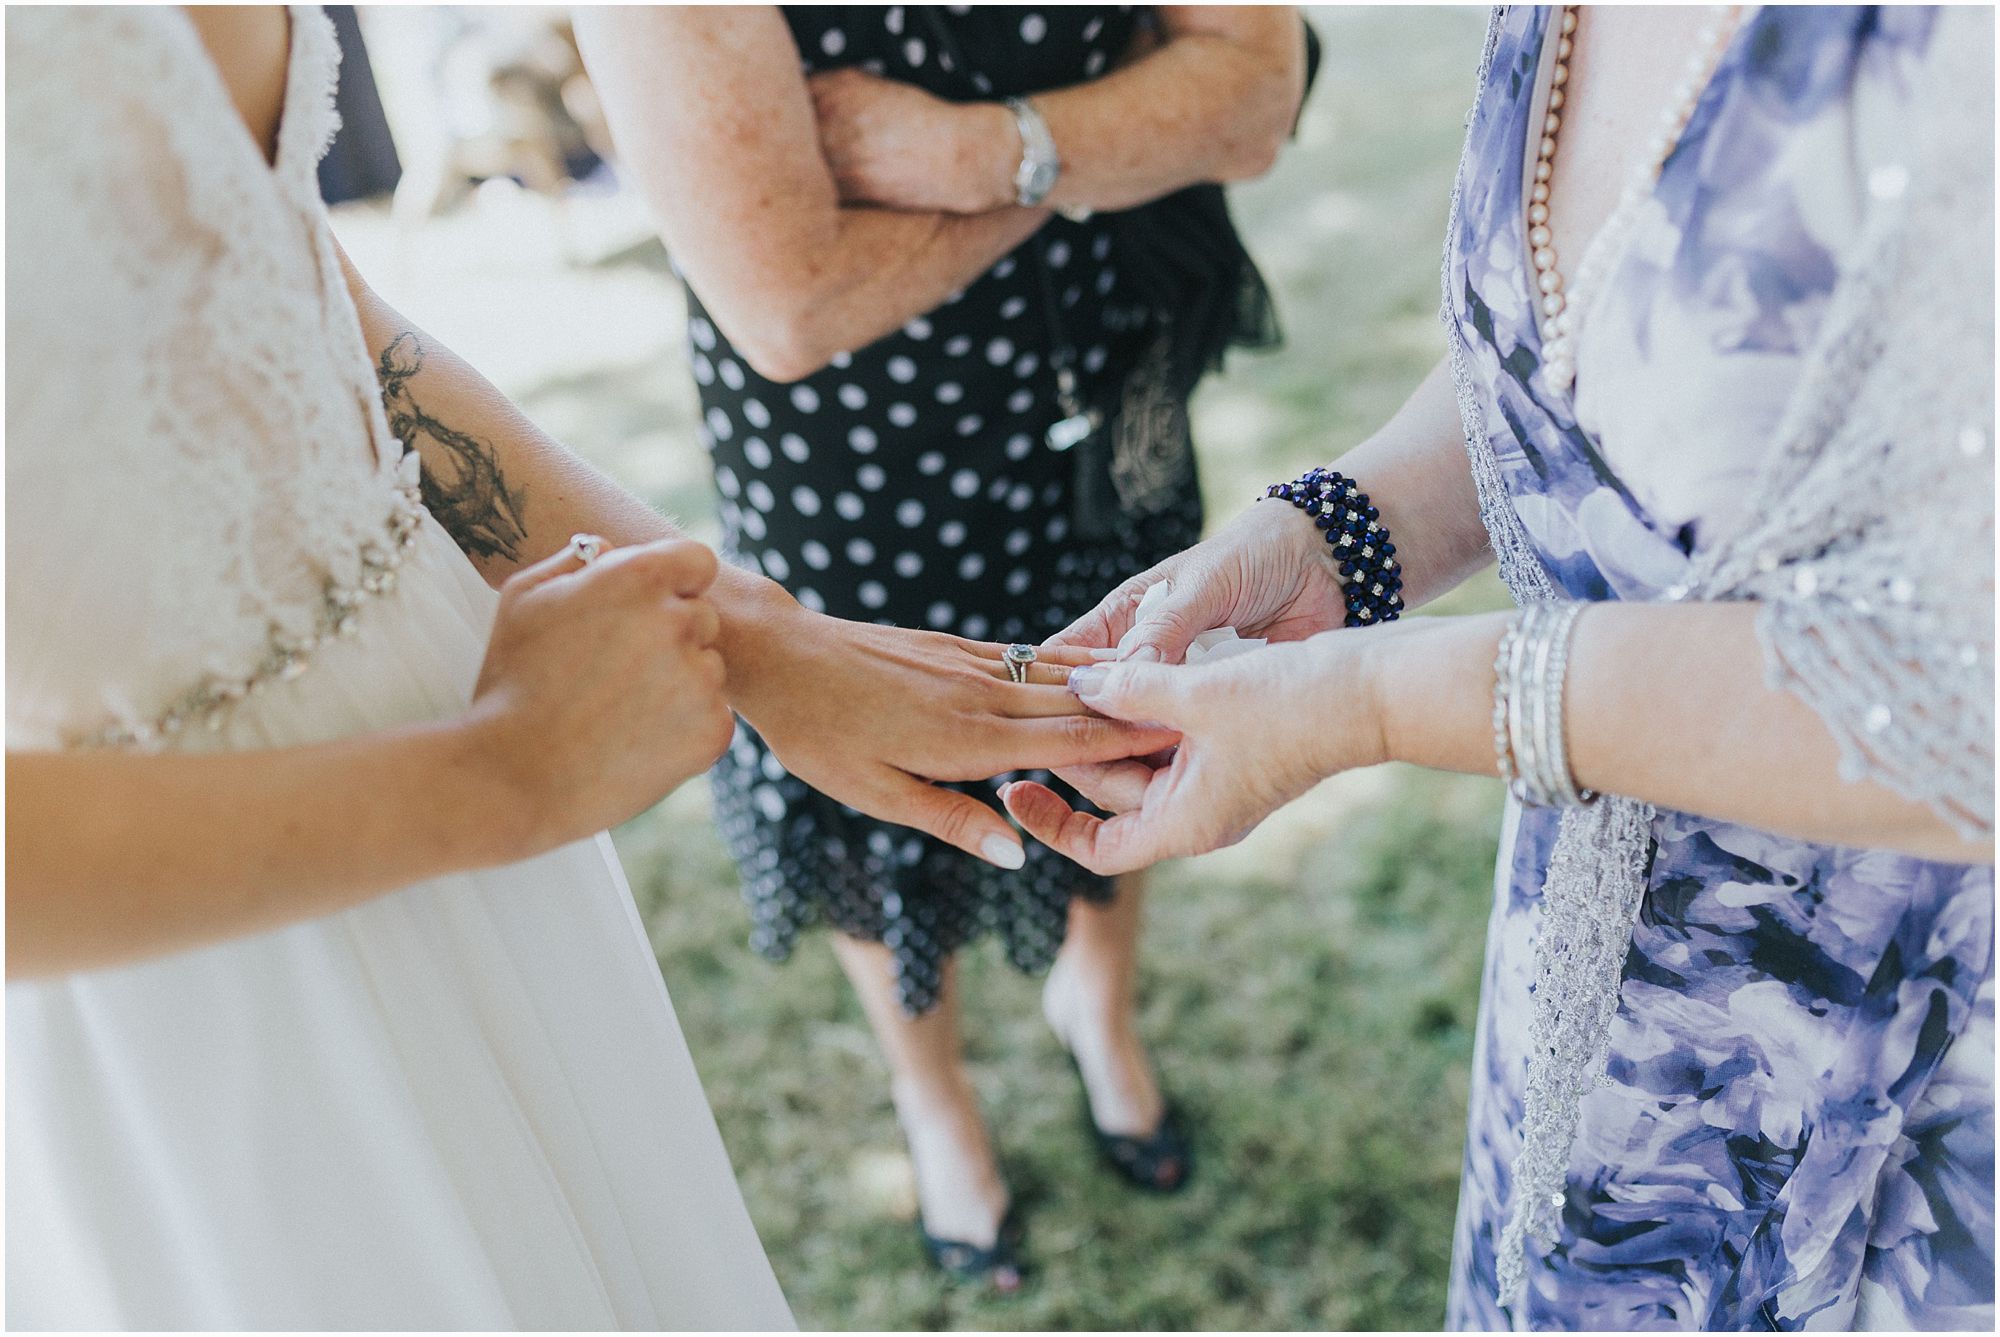 guests check out bride's ring